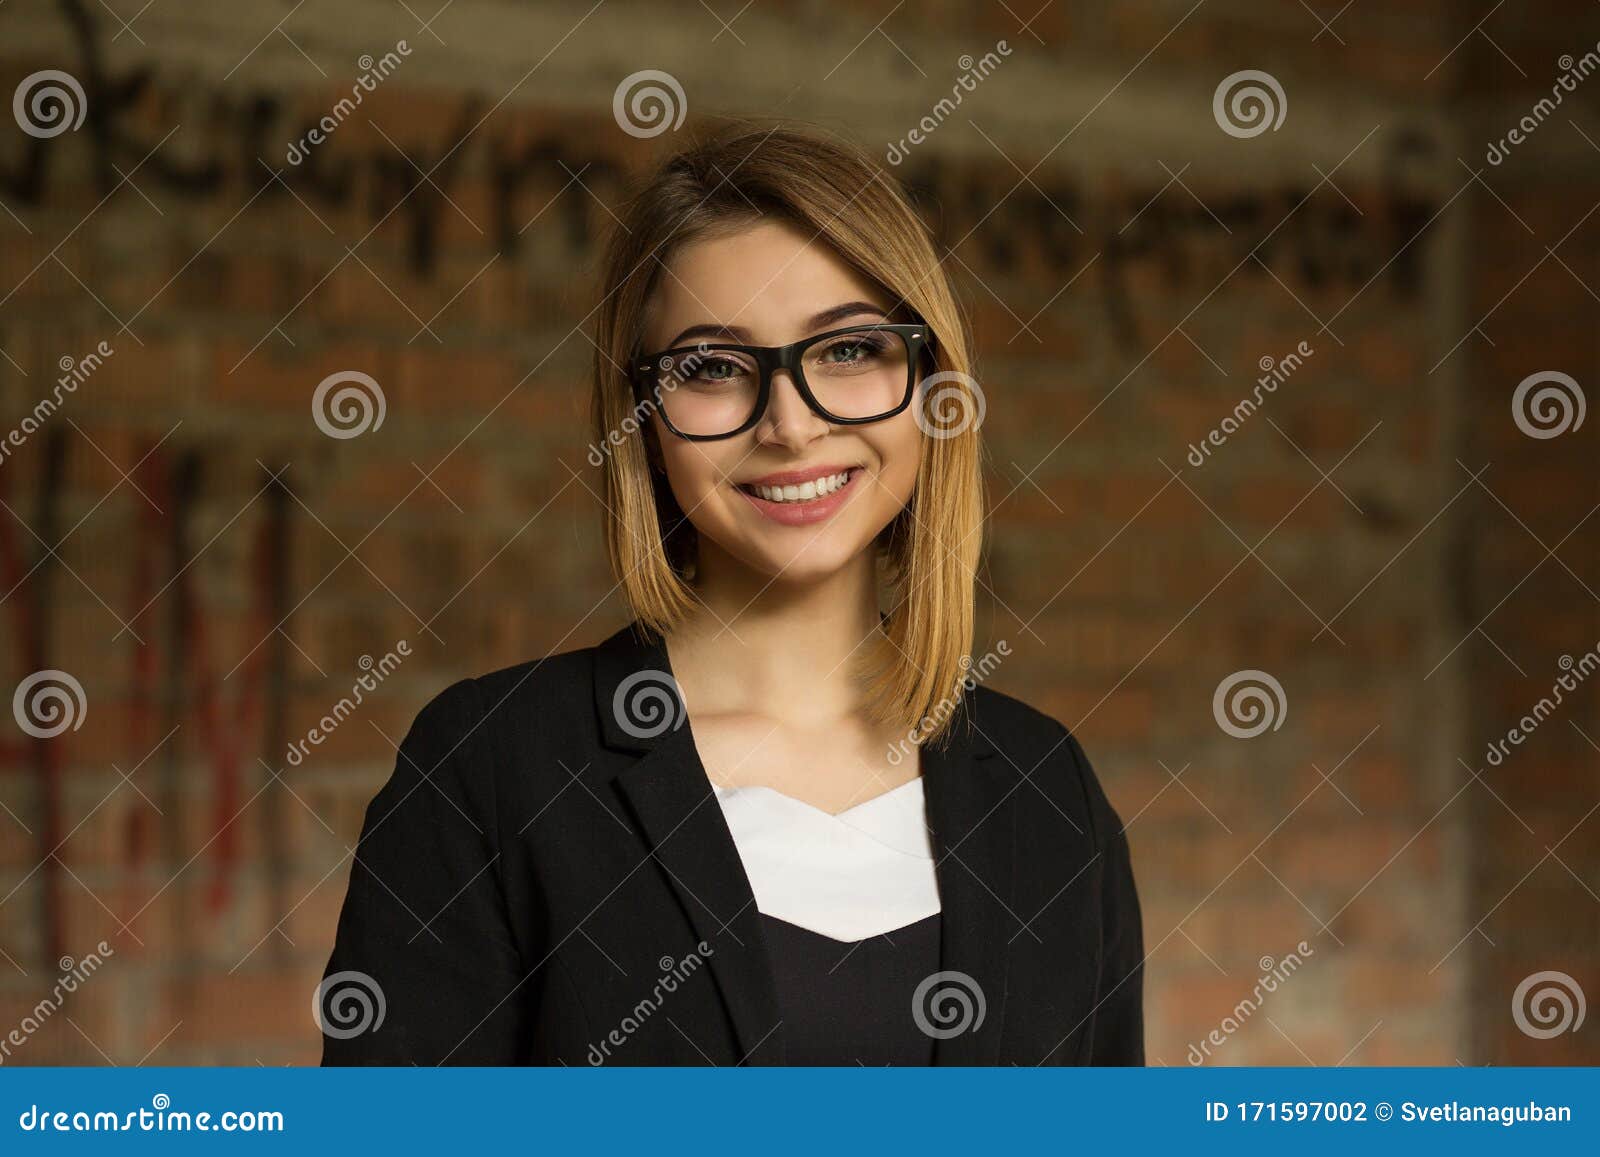 Woman Smiling Closeup Portrait Business Girl Looking At You Camera